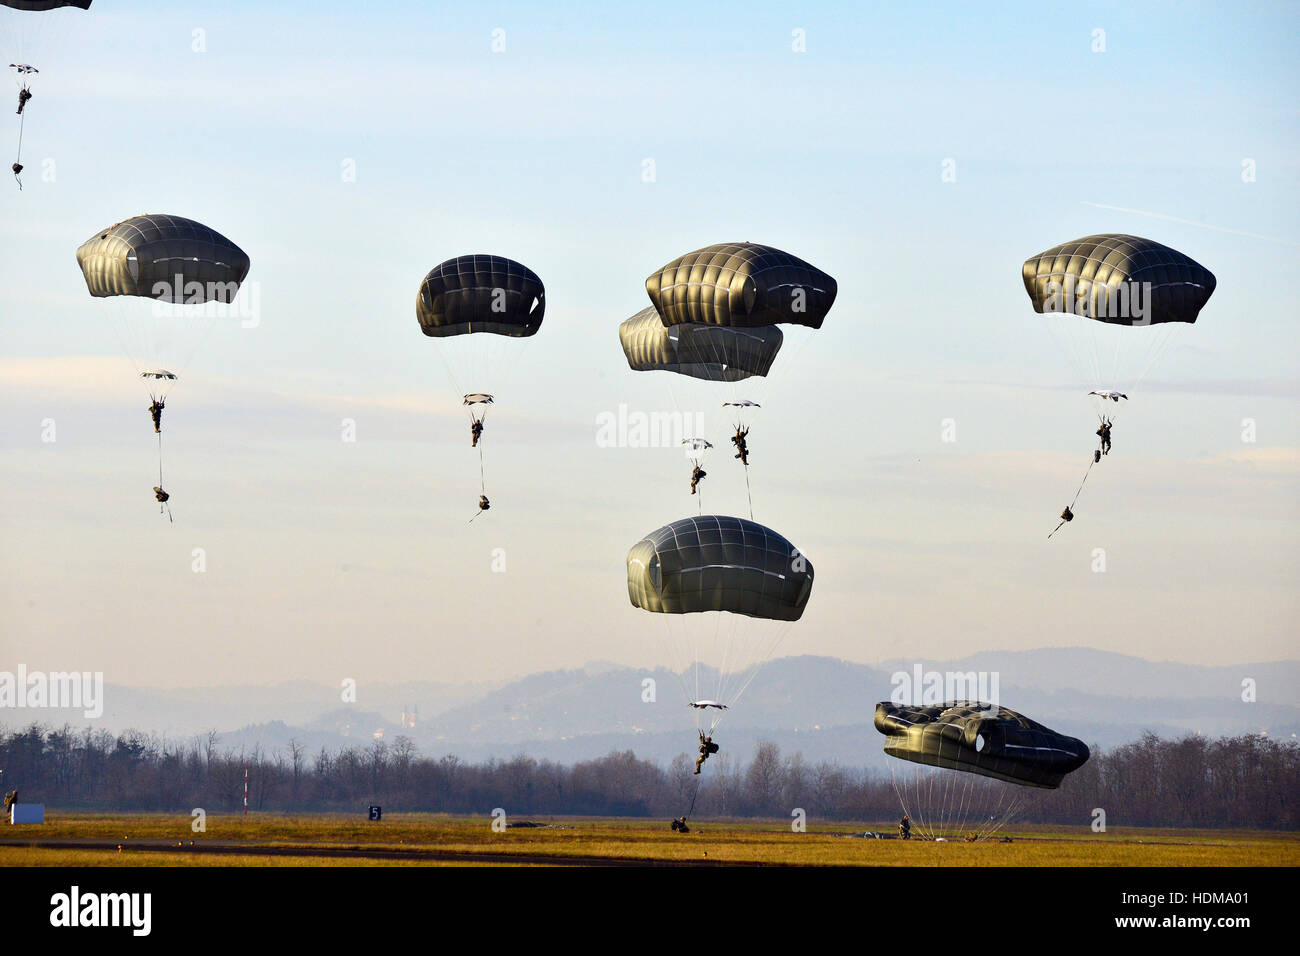 U.S. paratrooper soldiers parachute from a Lockheed C-130 Hercules transport aircraft during Exercise Mountain Shock at the Cerklje Drop Zone December 1, 2016 in Cerklje Ob Krki, Slovenia. Stock Photo